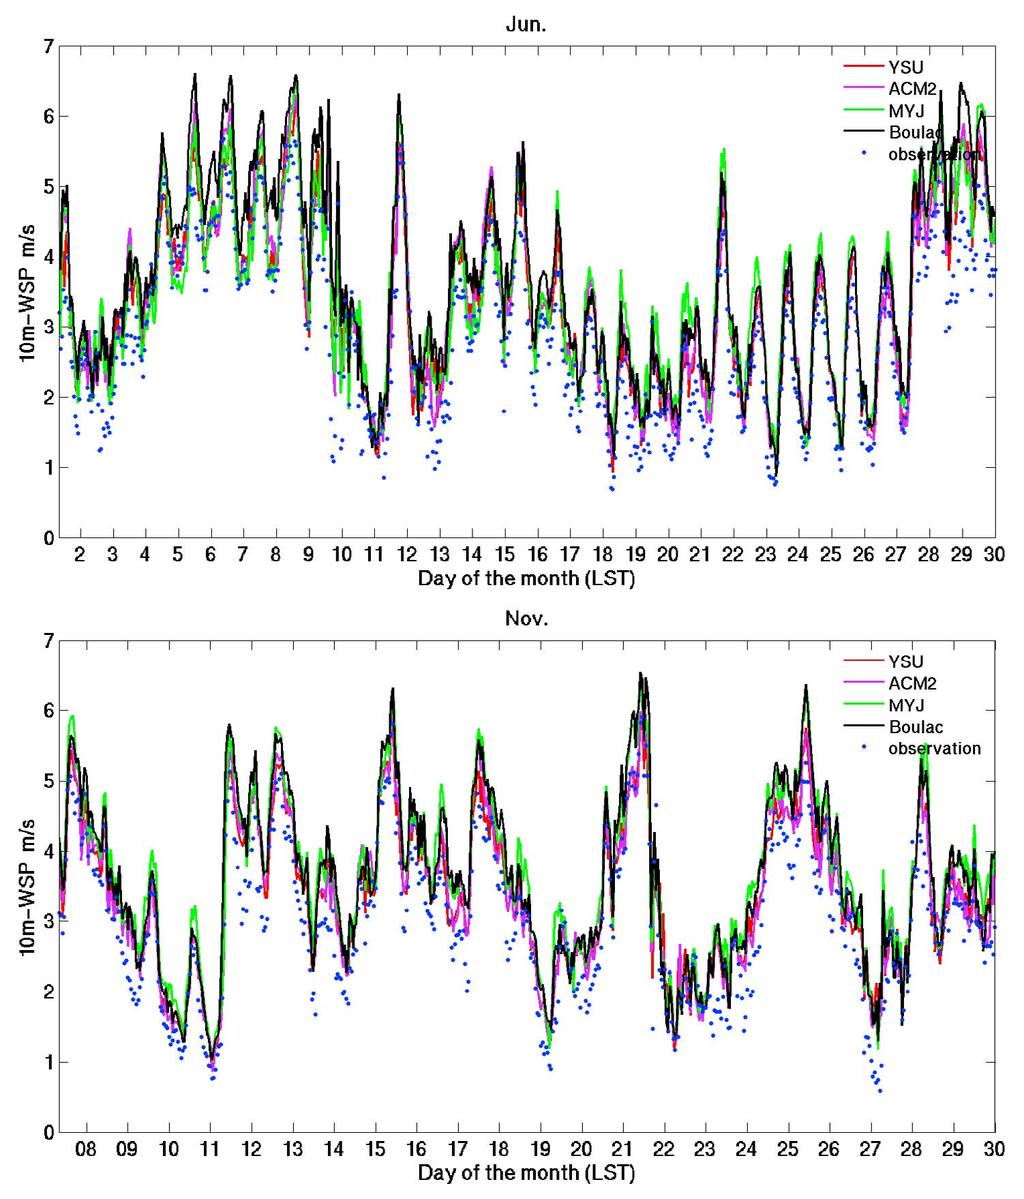 Figure 18. Mean time series of 10 m wind speed (WSP) over 40 sites in Jun and Nov 2006.